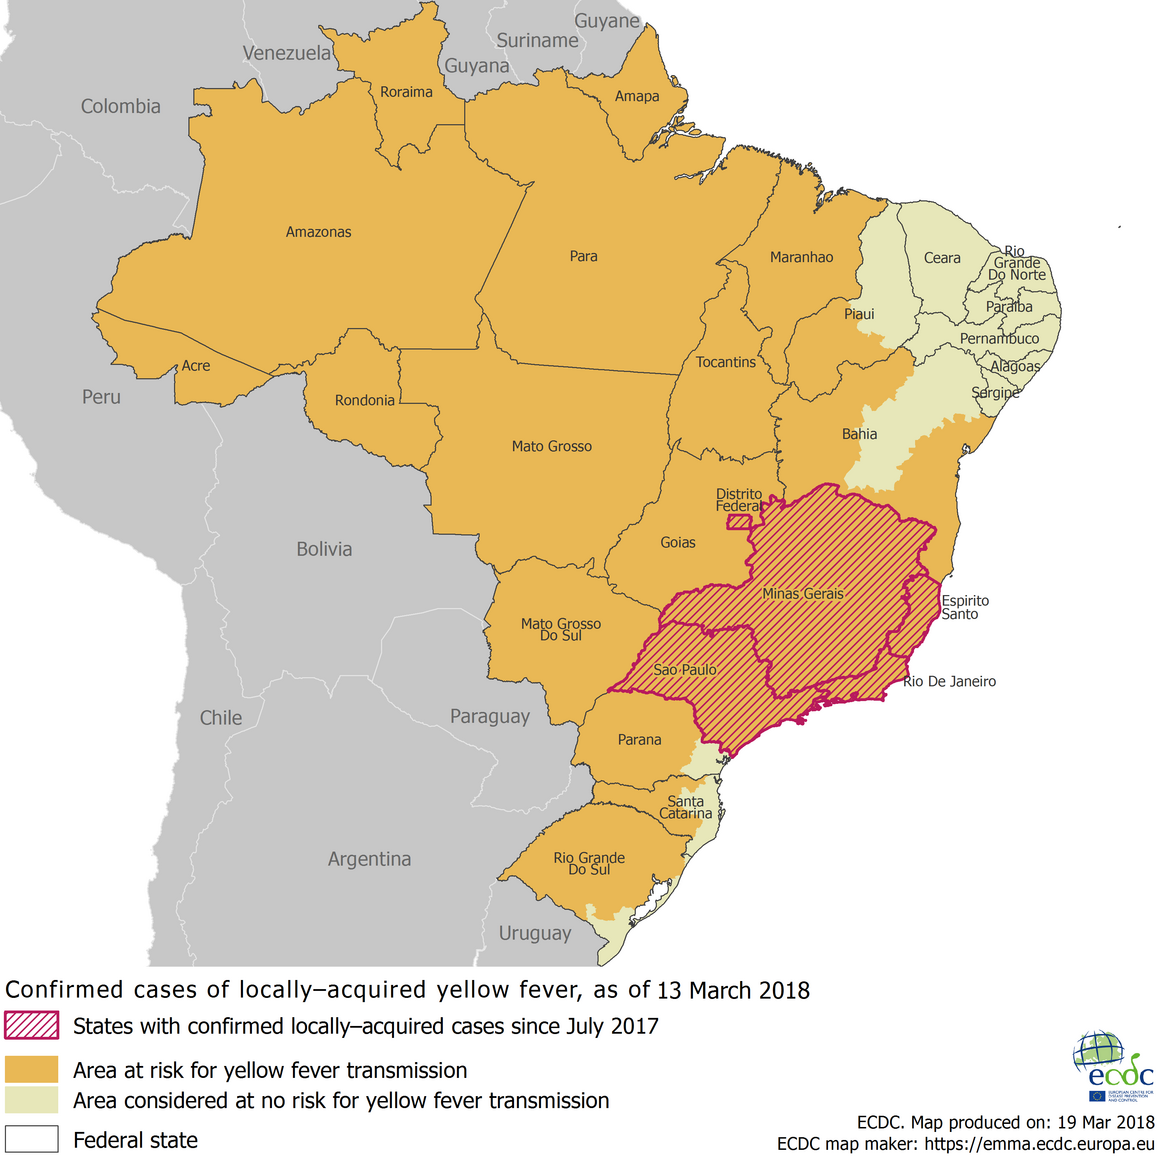 Map - Yellow fever distribution and areas of risk in Brazil, as of 13 March 2018